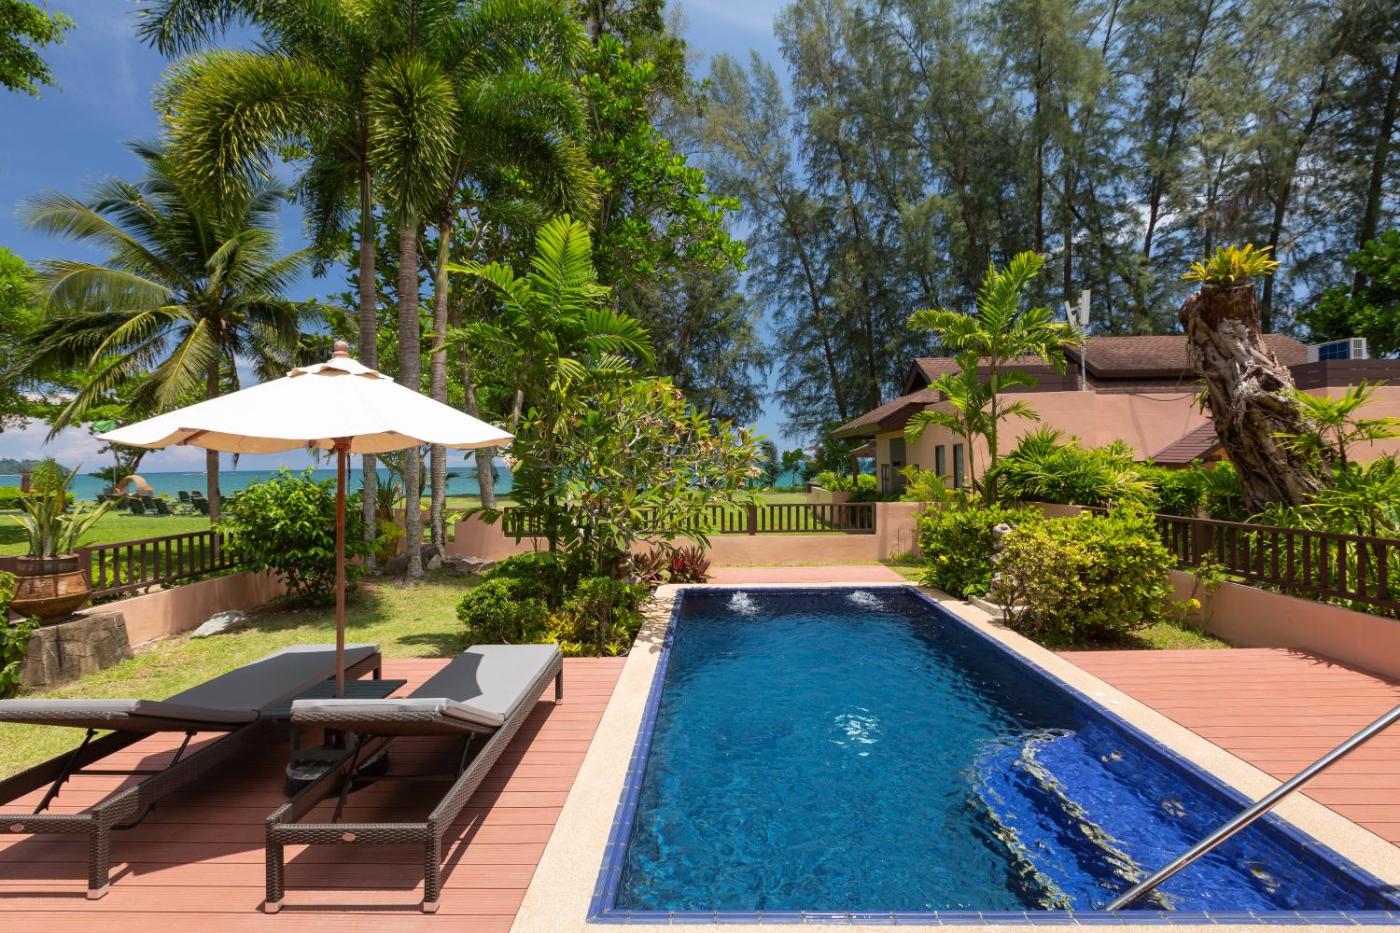 Hotel with private pool - Khaolak Merlin Resort